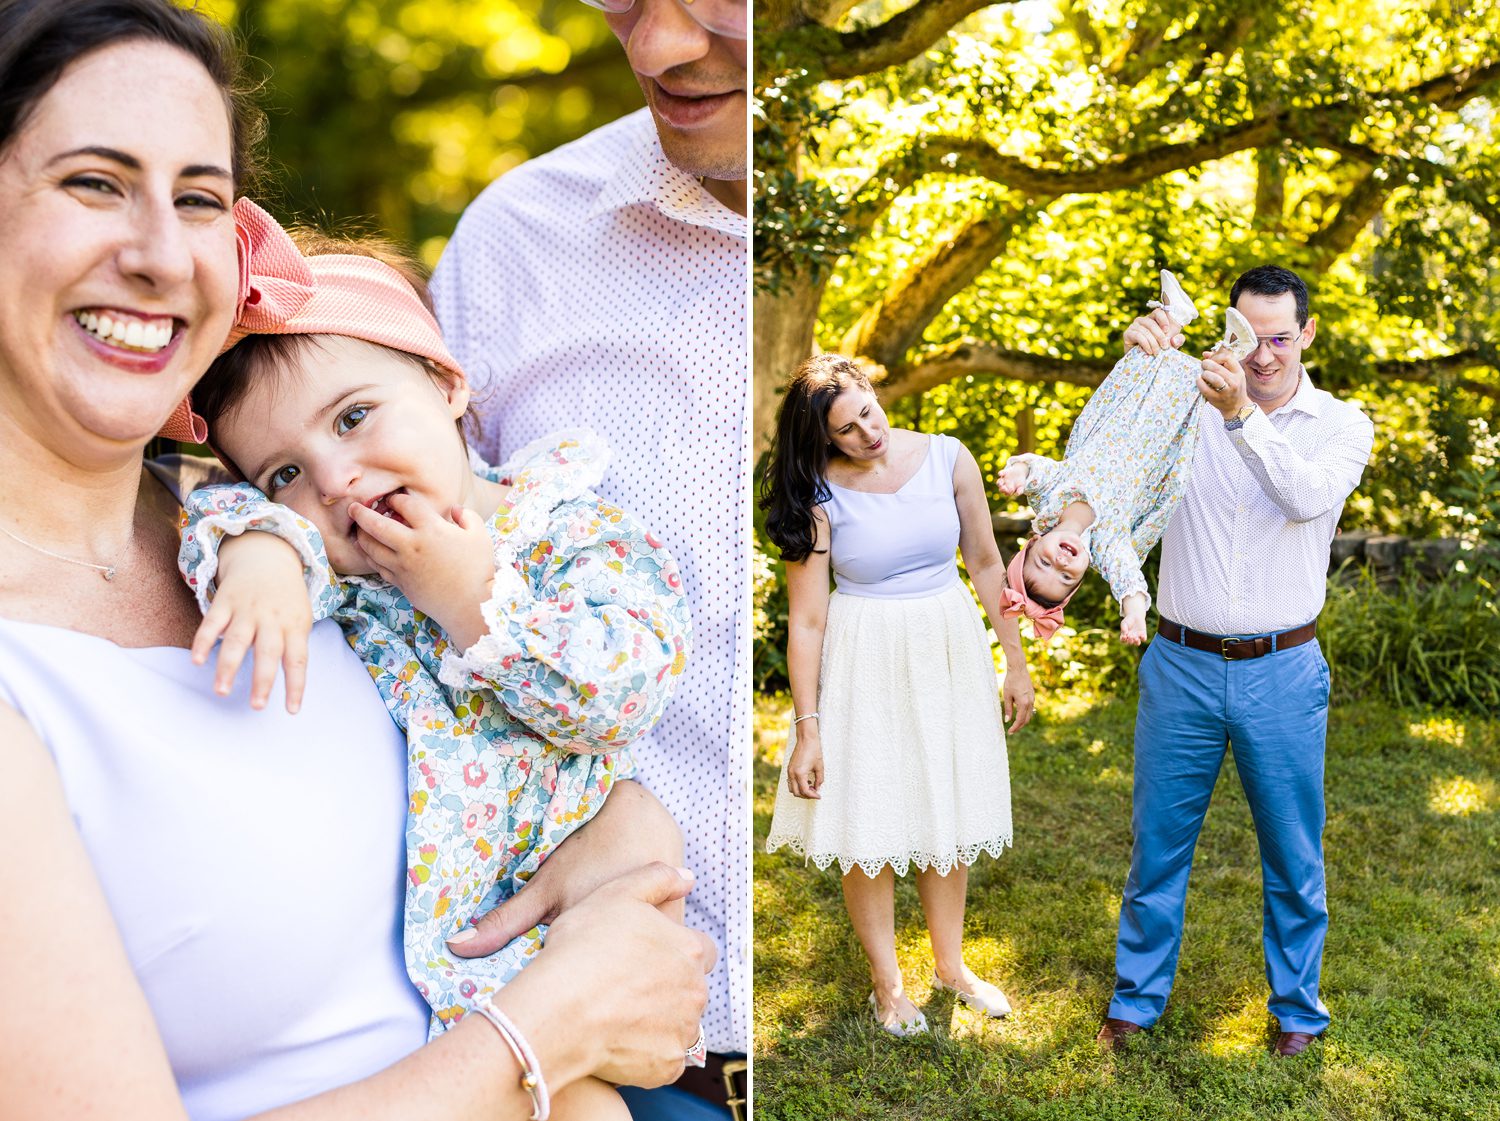 Candid photos of parents with their baby daughters for an outdoor family portrait session in NJ